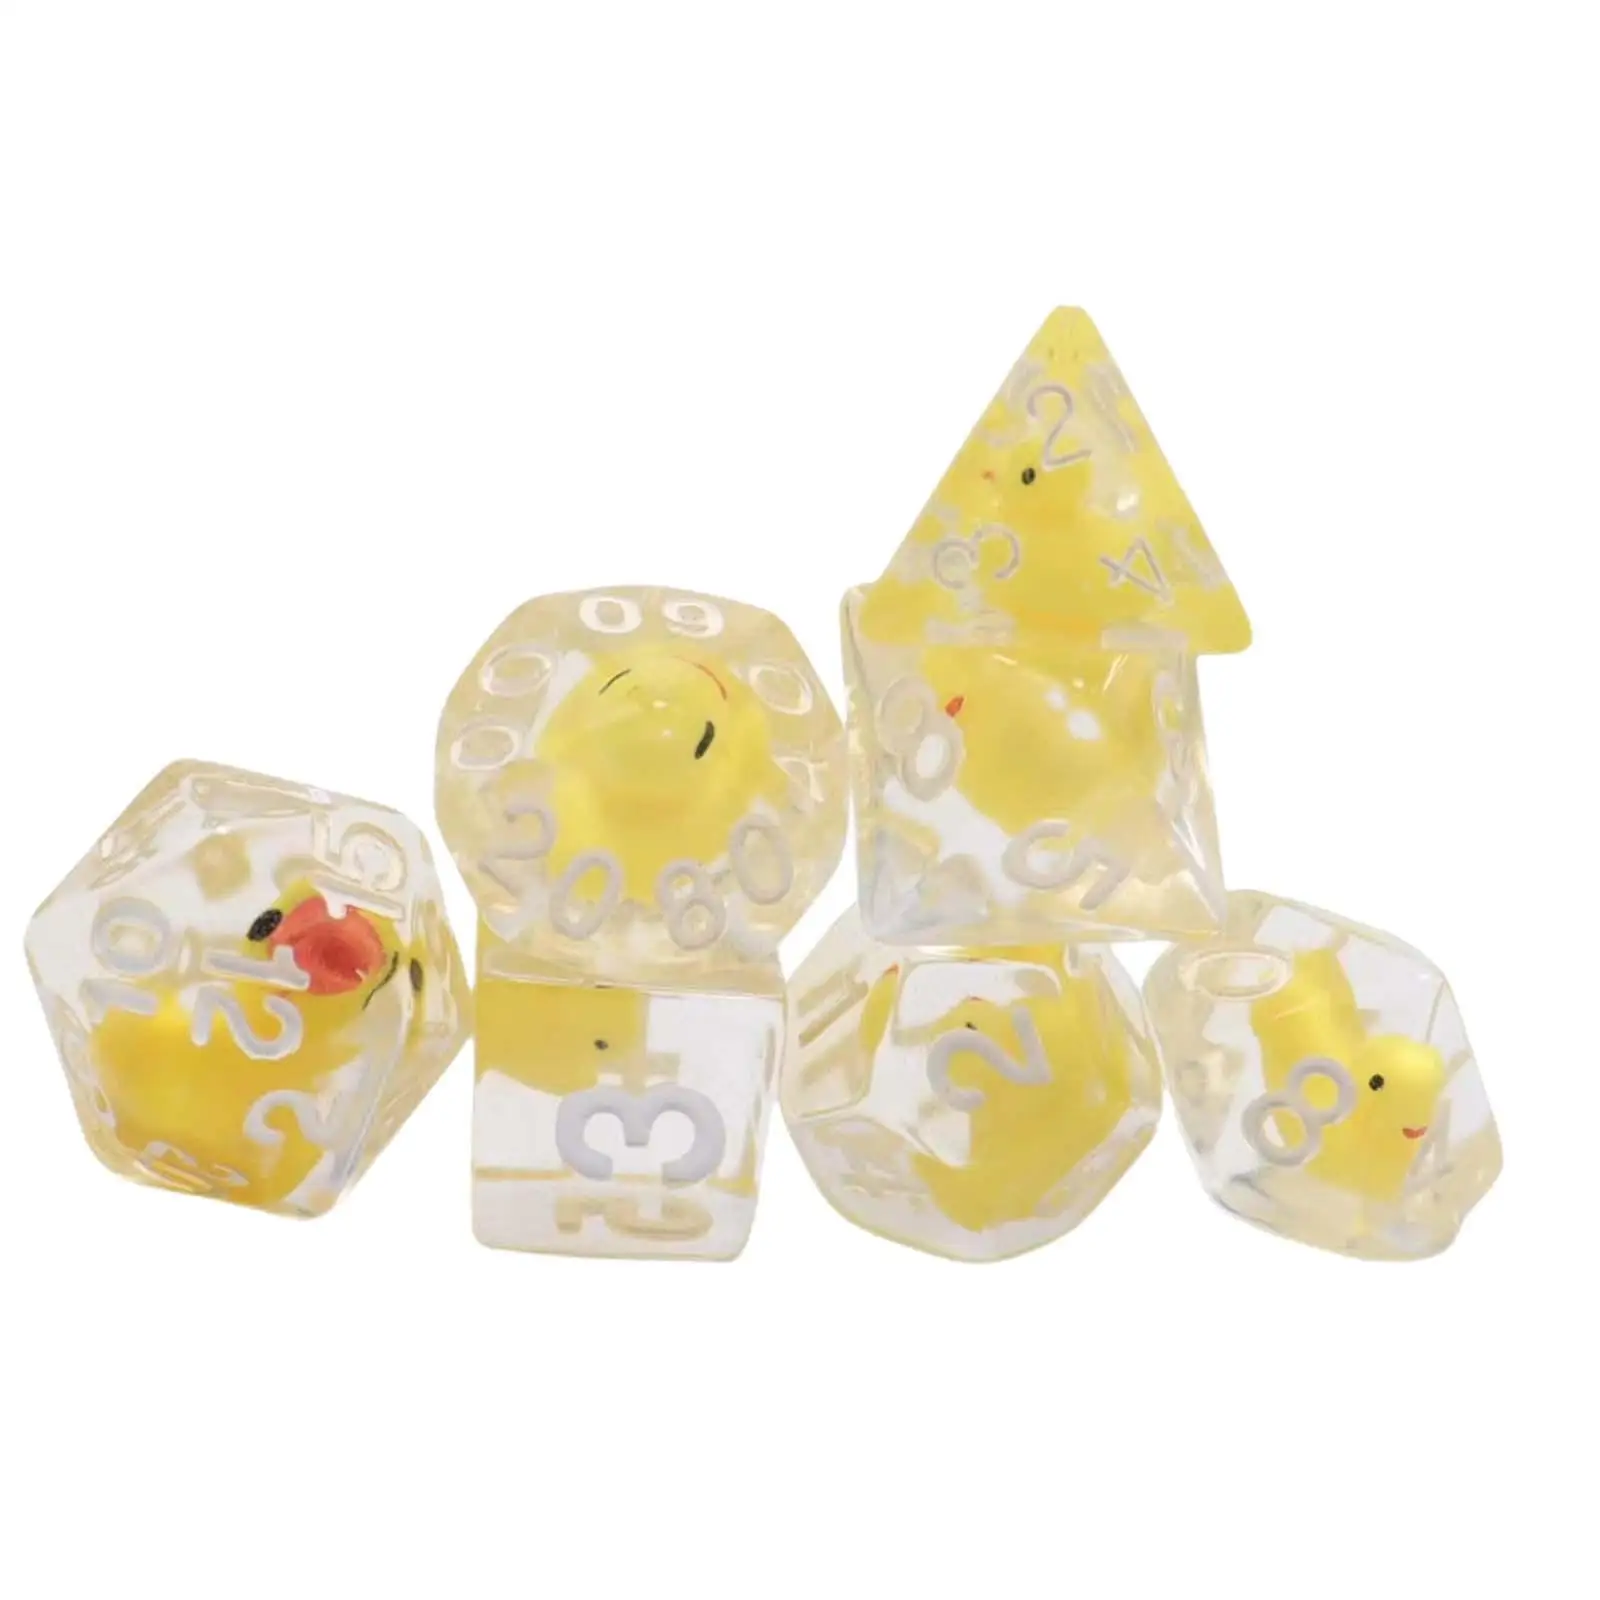 7 Pieces Multi Sided Dices Role Playing Game Dices Polyhedral Dices Set for Party KTV Table Game Role Playing Game Board Game